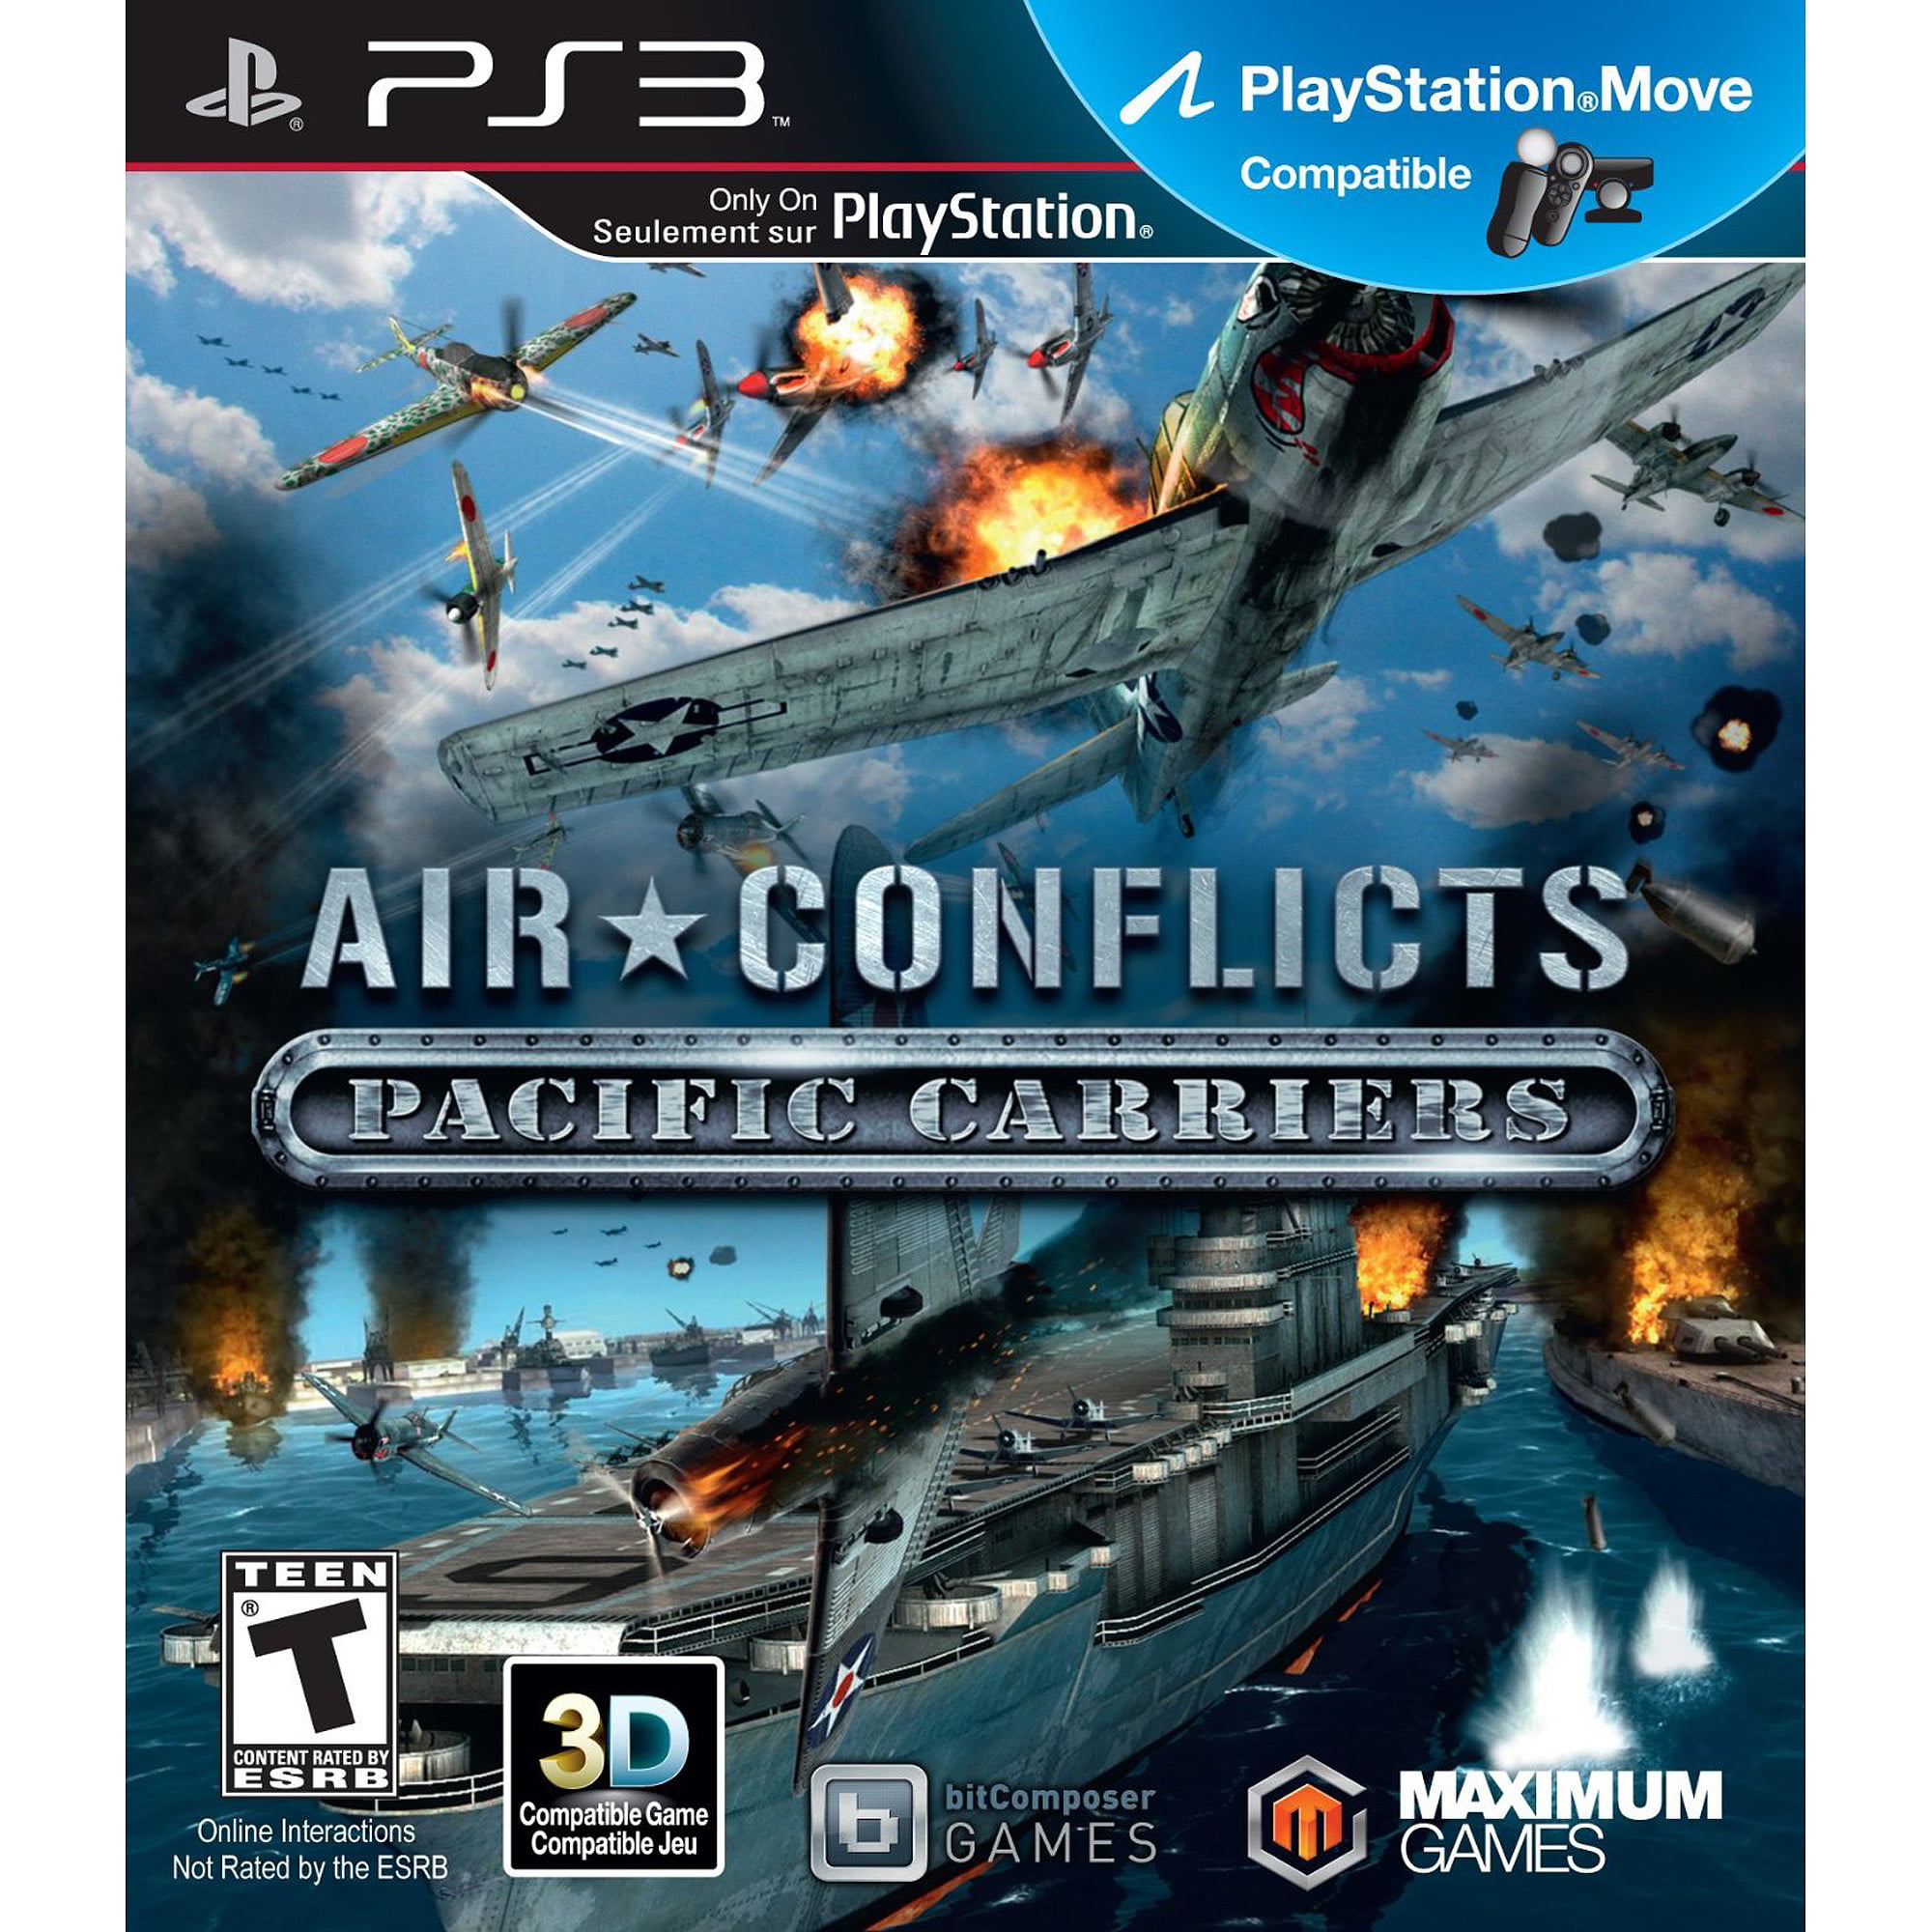 Пс игры самолет. Игра Air Conflicts Pacific Carriers. Игра на ps3 Air Conflicts. Air Conflicts на пс3. Air Conflicts: Pacific Carriers.